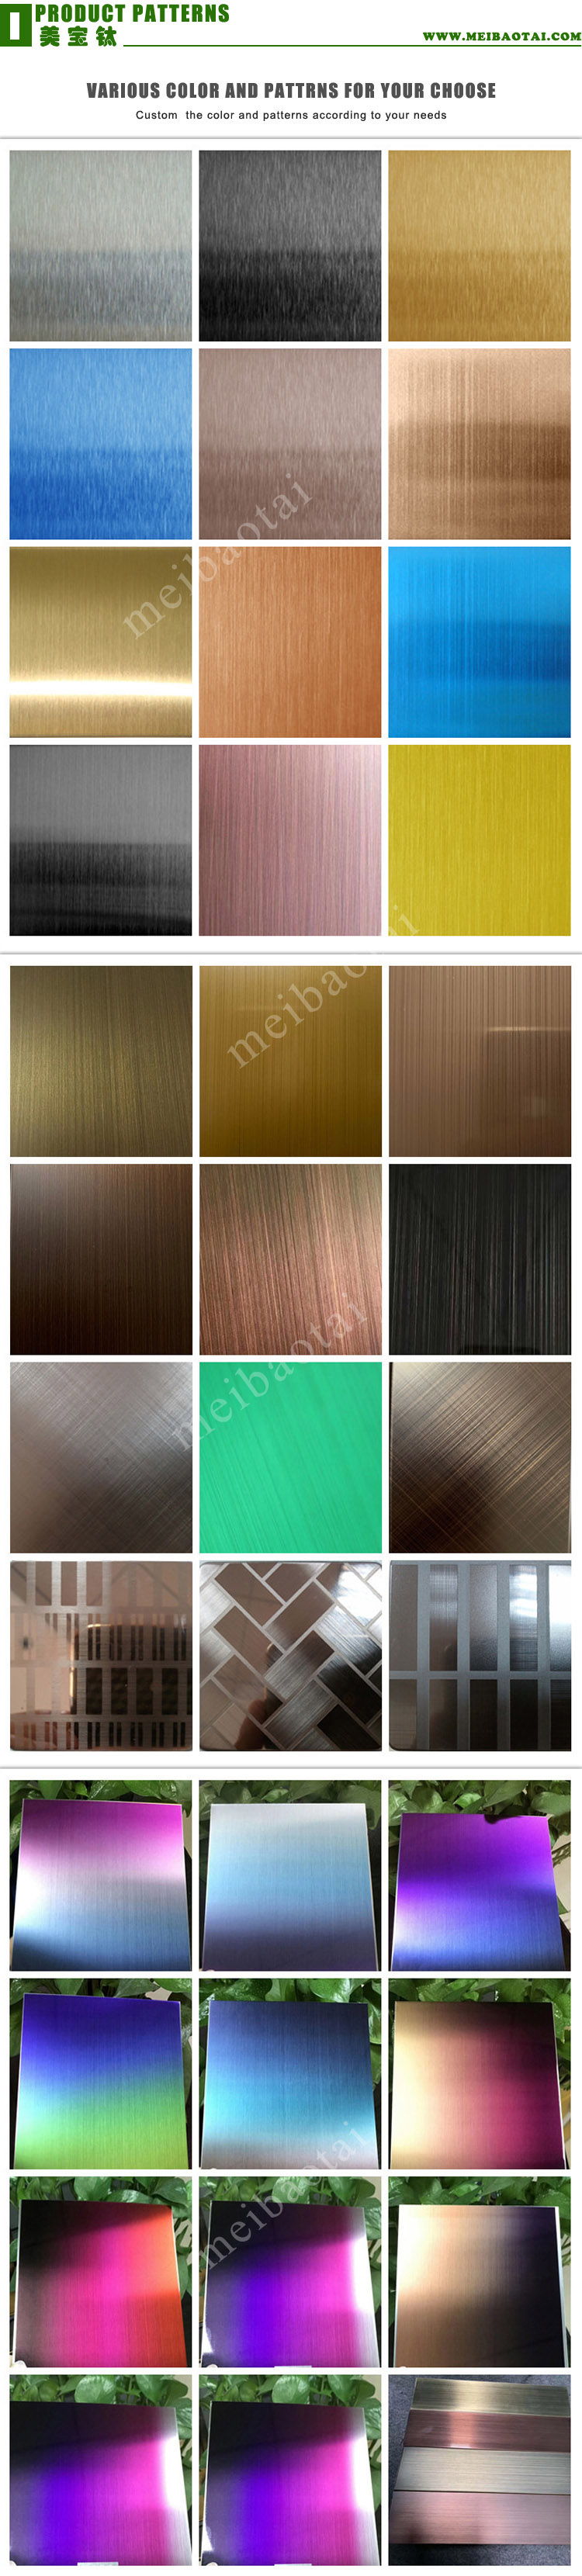 hairline_products_patterns